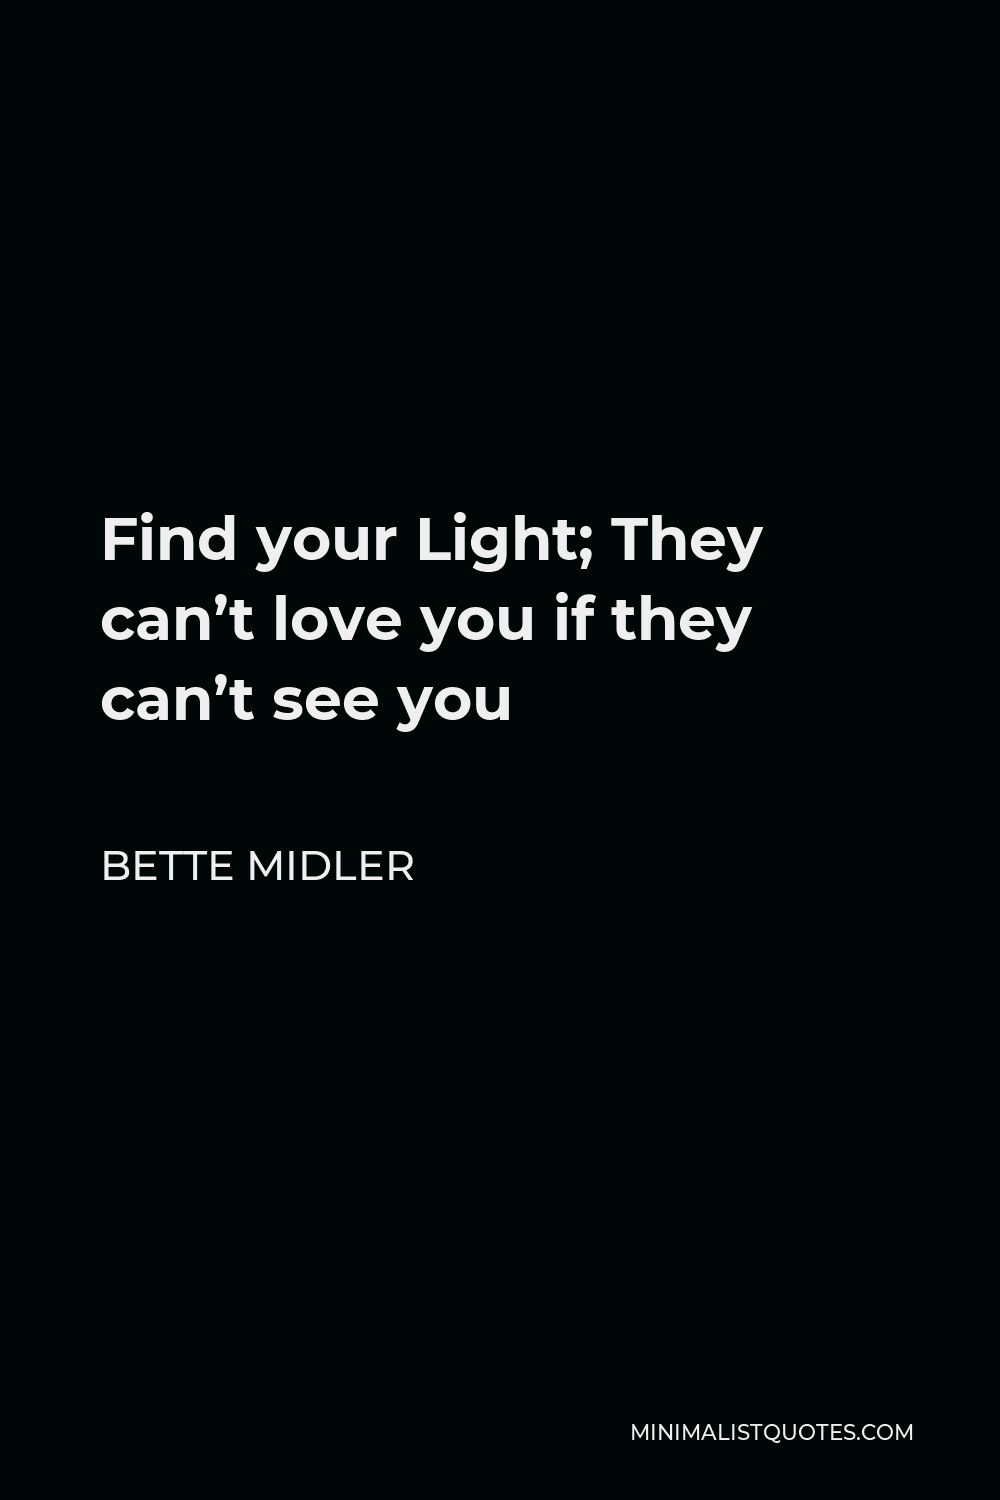 Bette Midler Quote - Find your Light; They can’t love you if they can’t see you